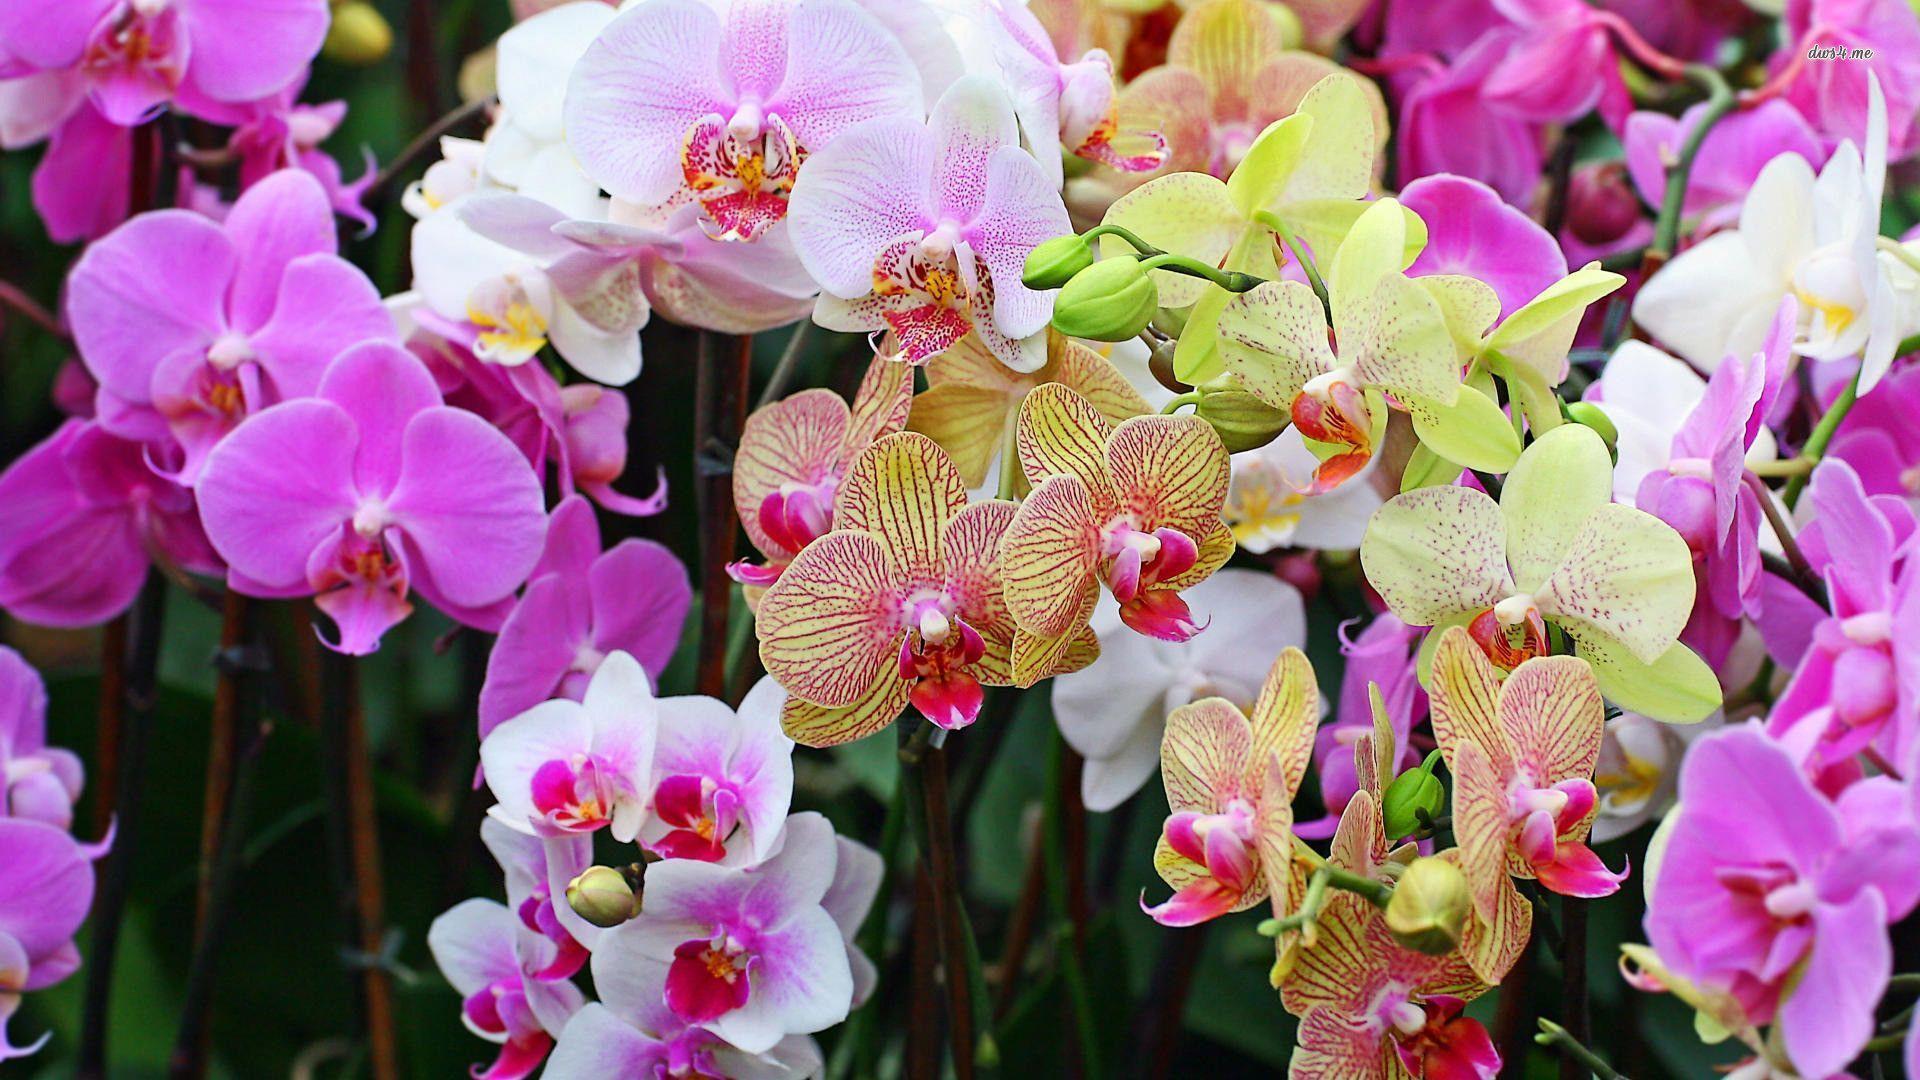 Colorful Orchids wallpaper wallpaper - #